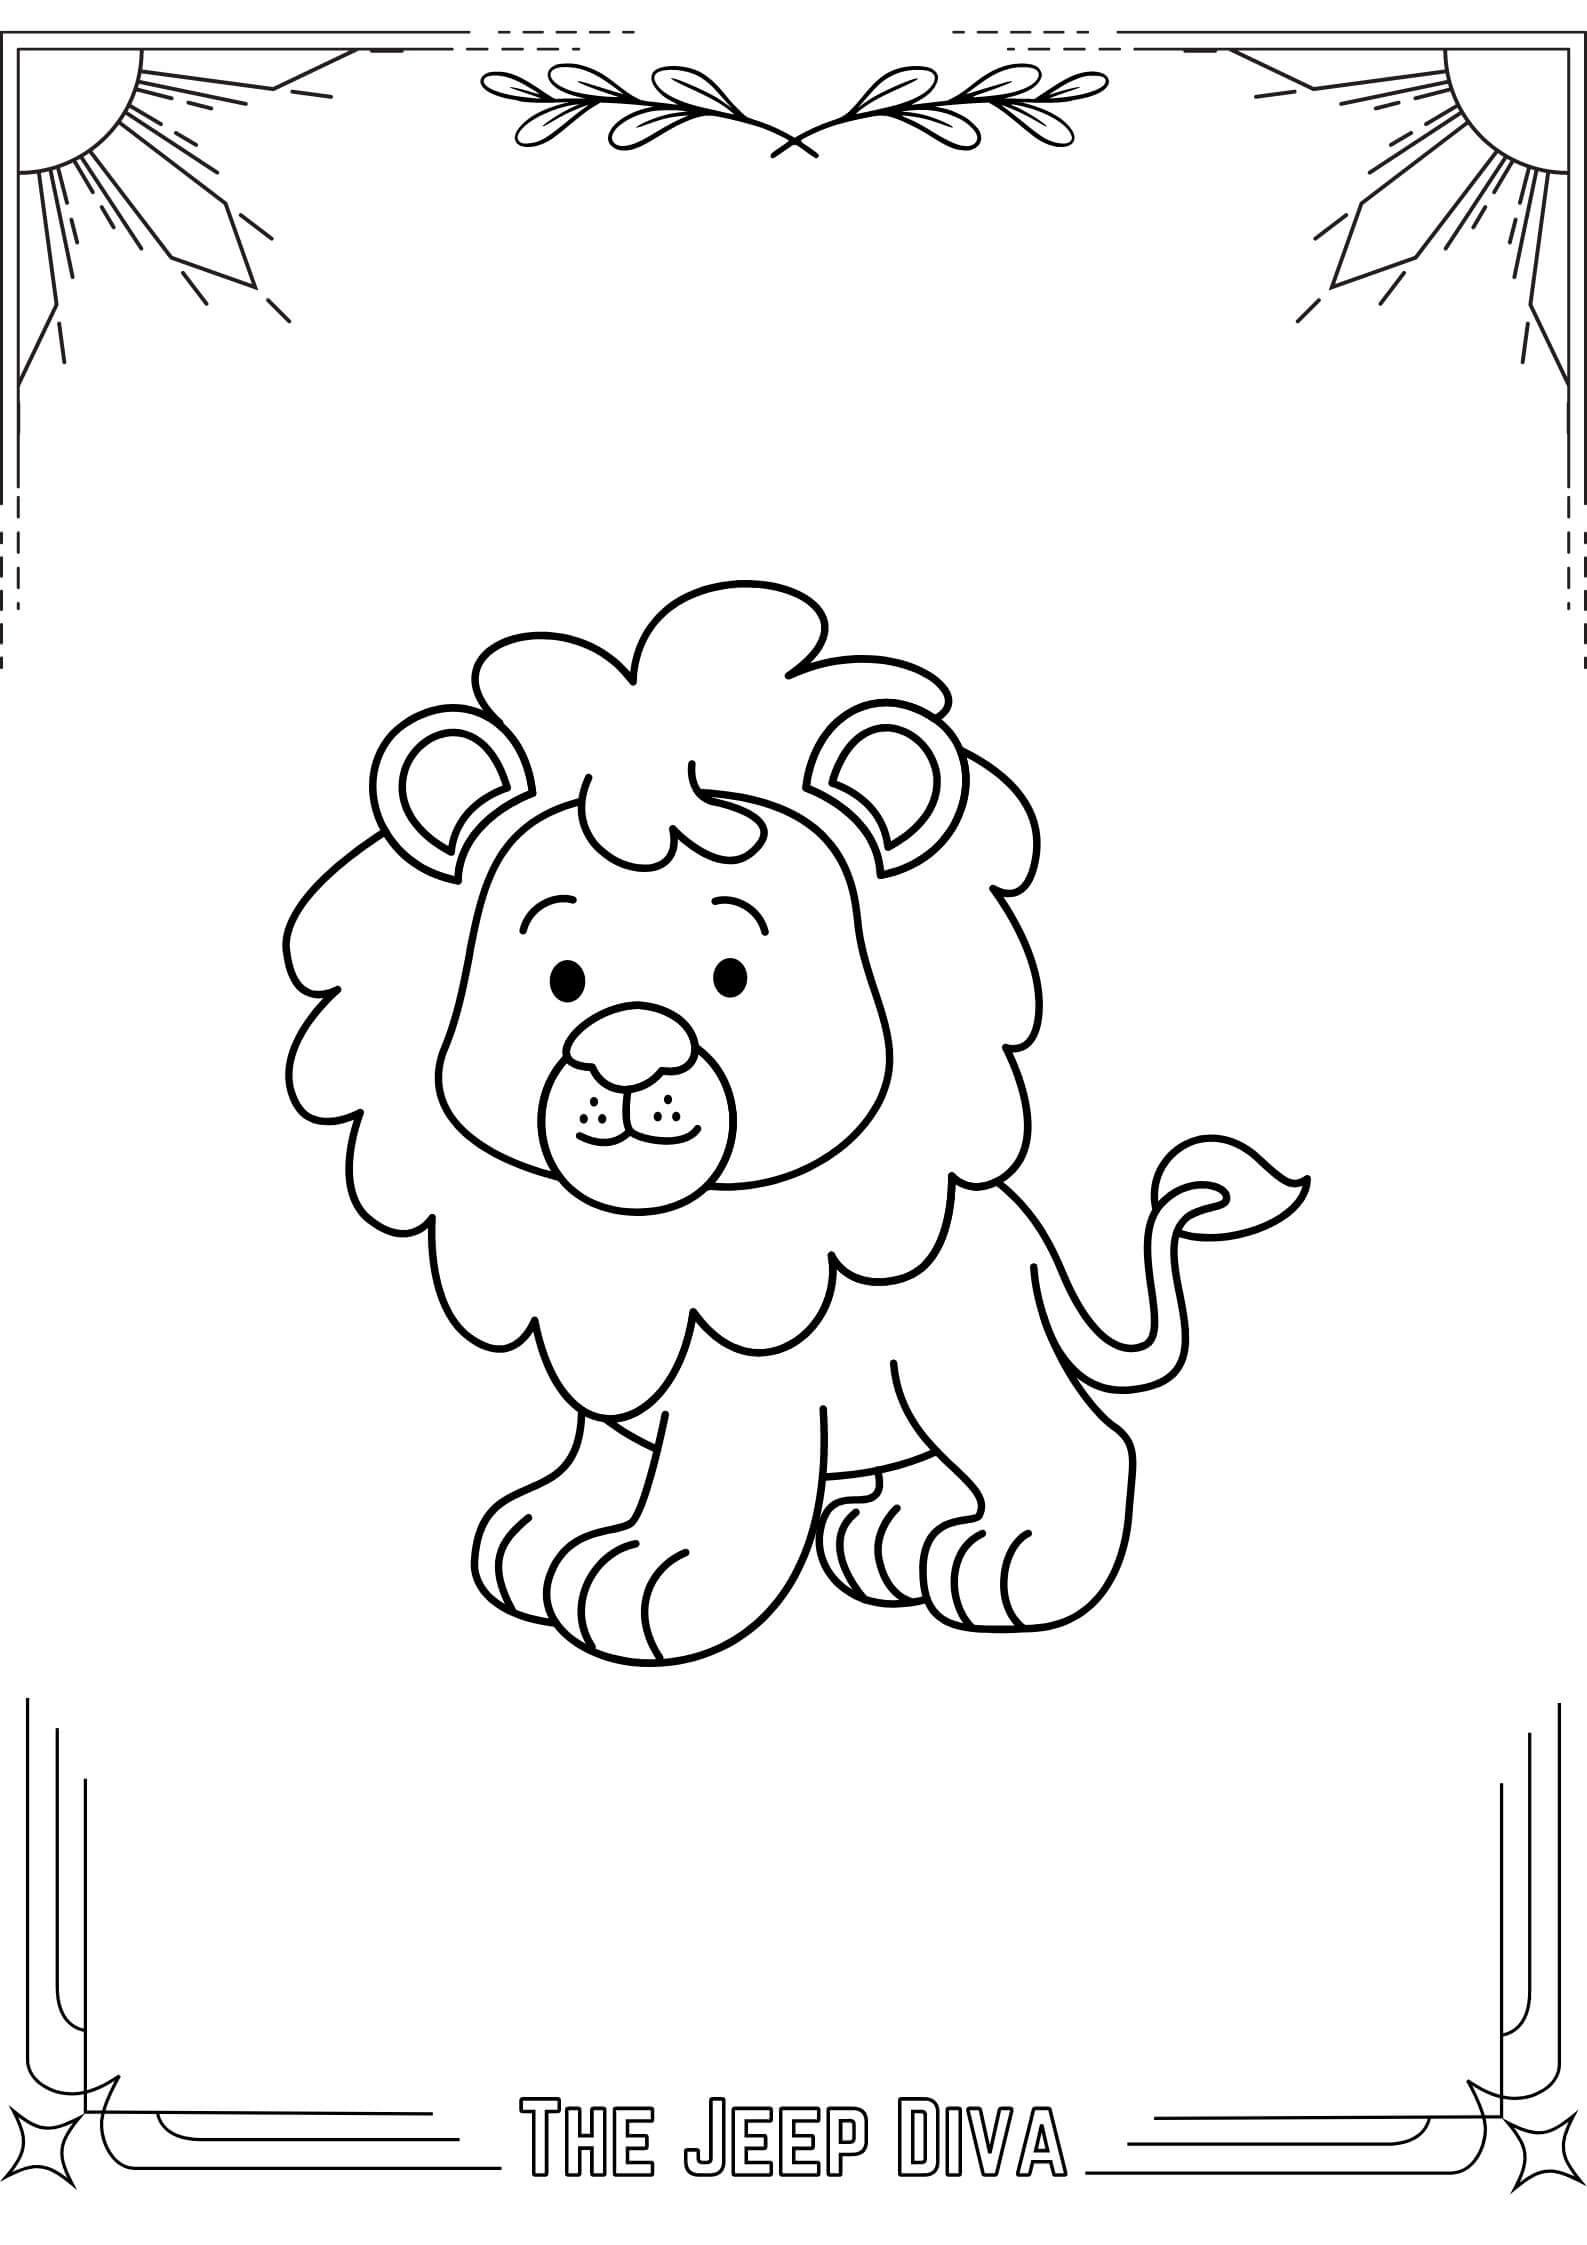 The Jeep Diva Coloring Page 4 Lion